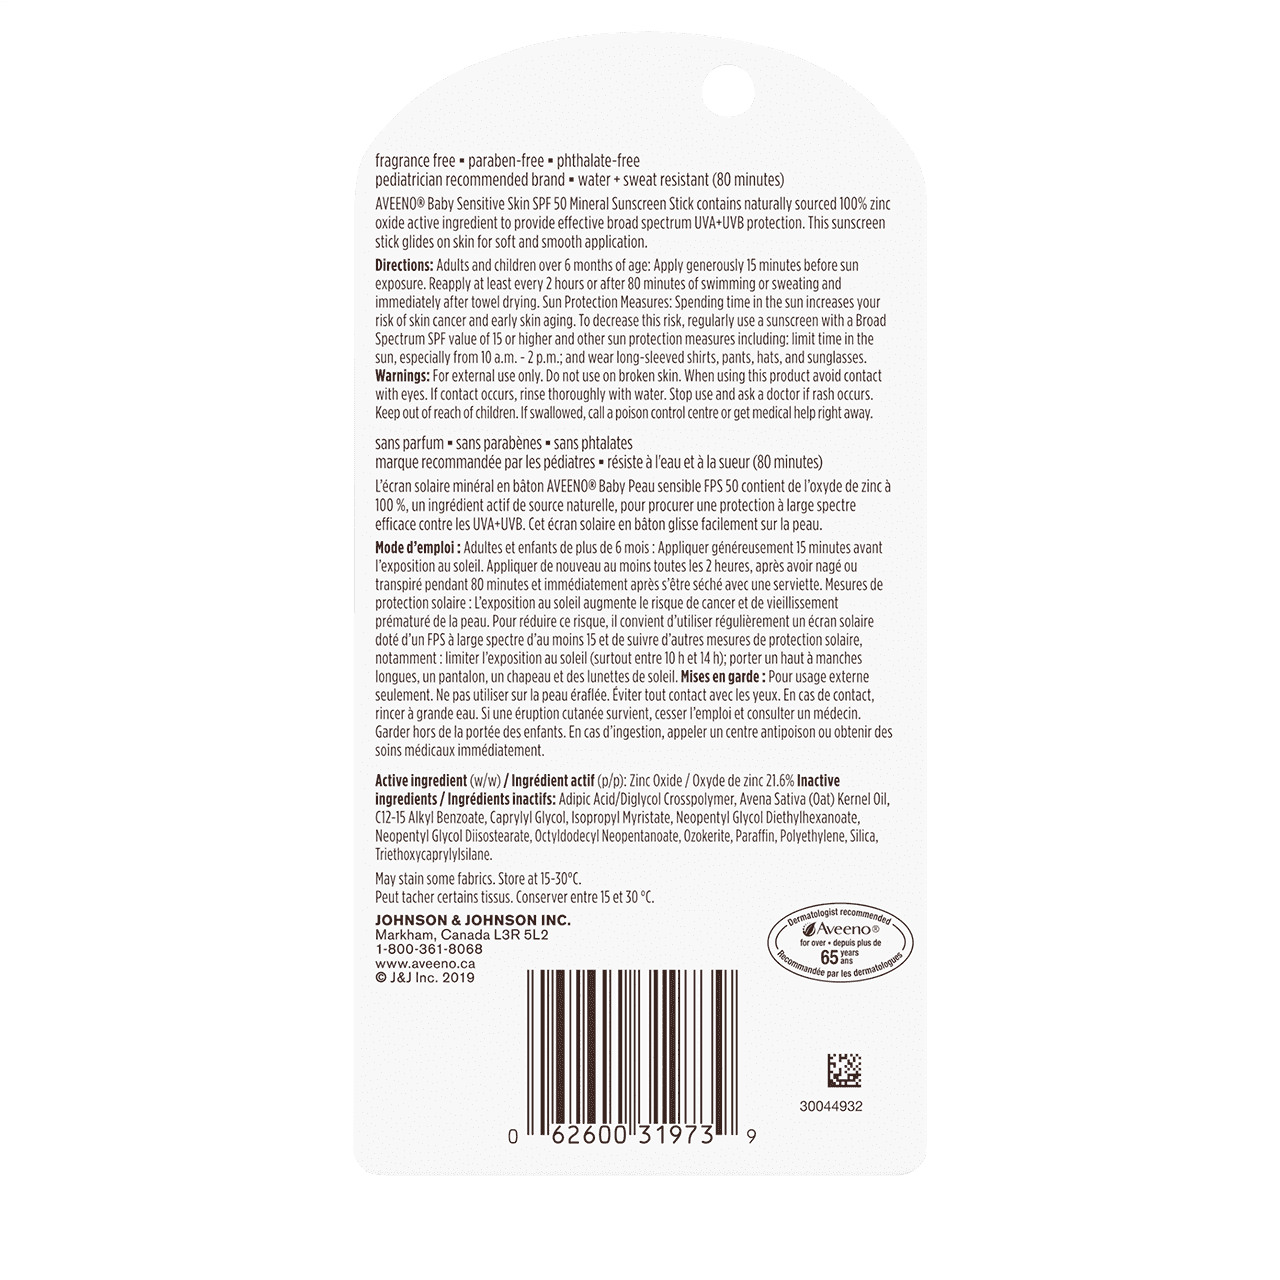 A packet of AVEENO® Baby Sensitive Skin Mineral sunscreen stick SPF 50, 13gr, back label 